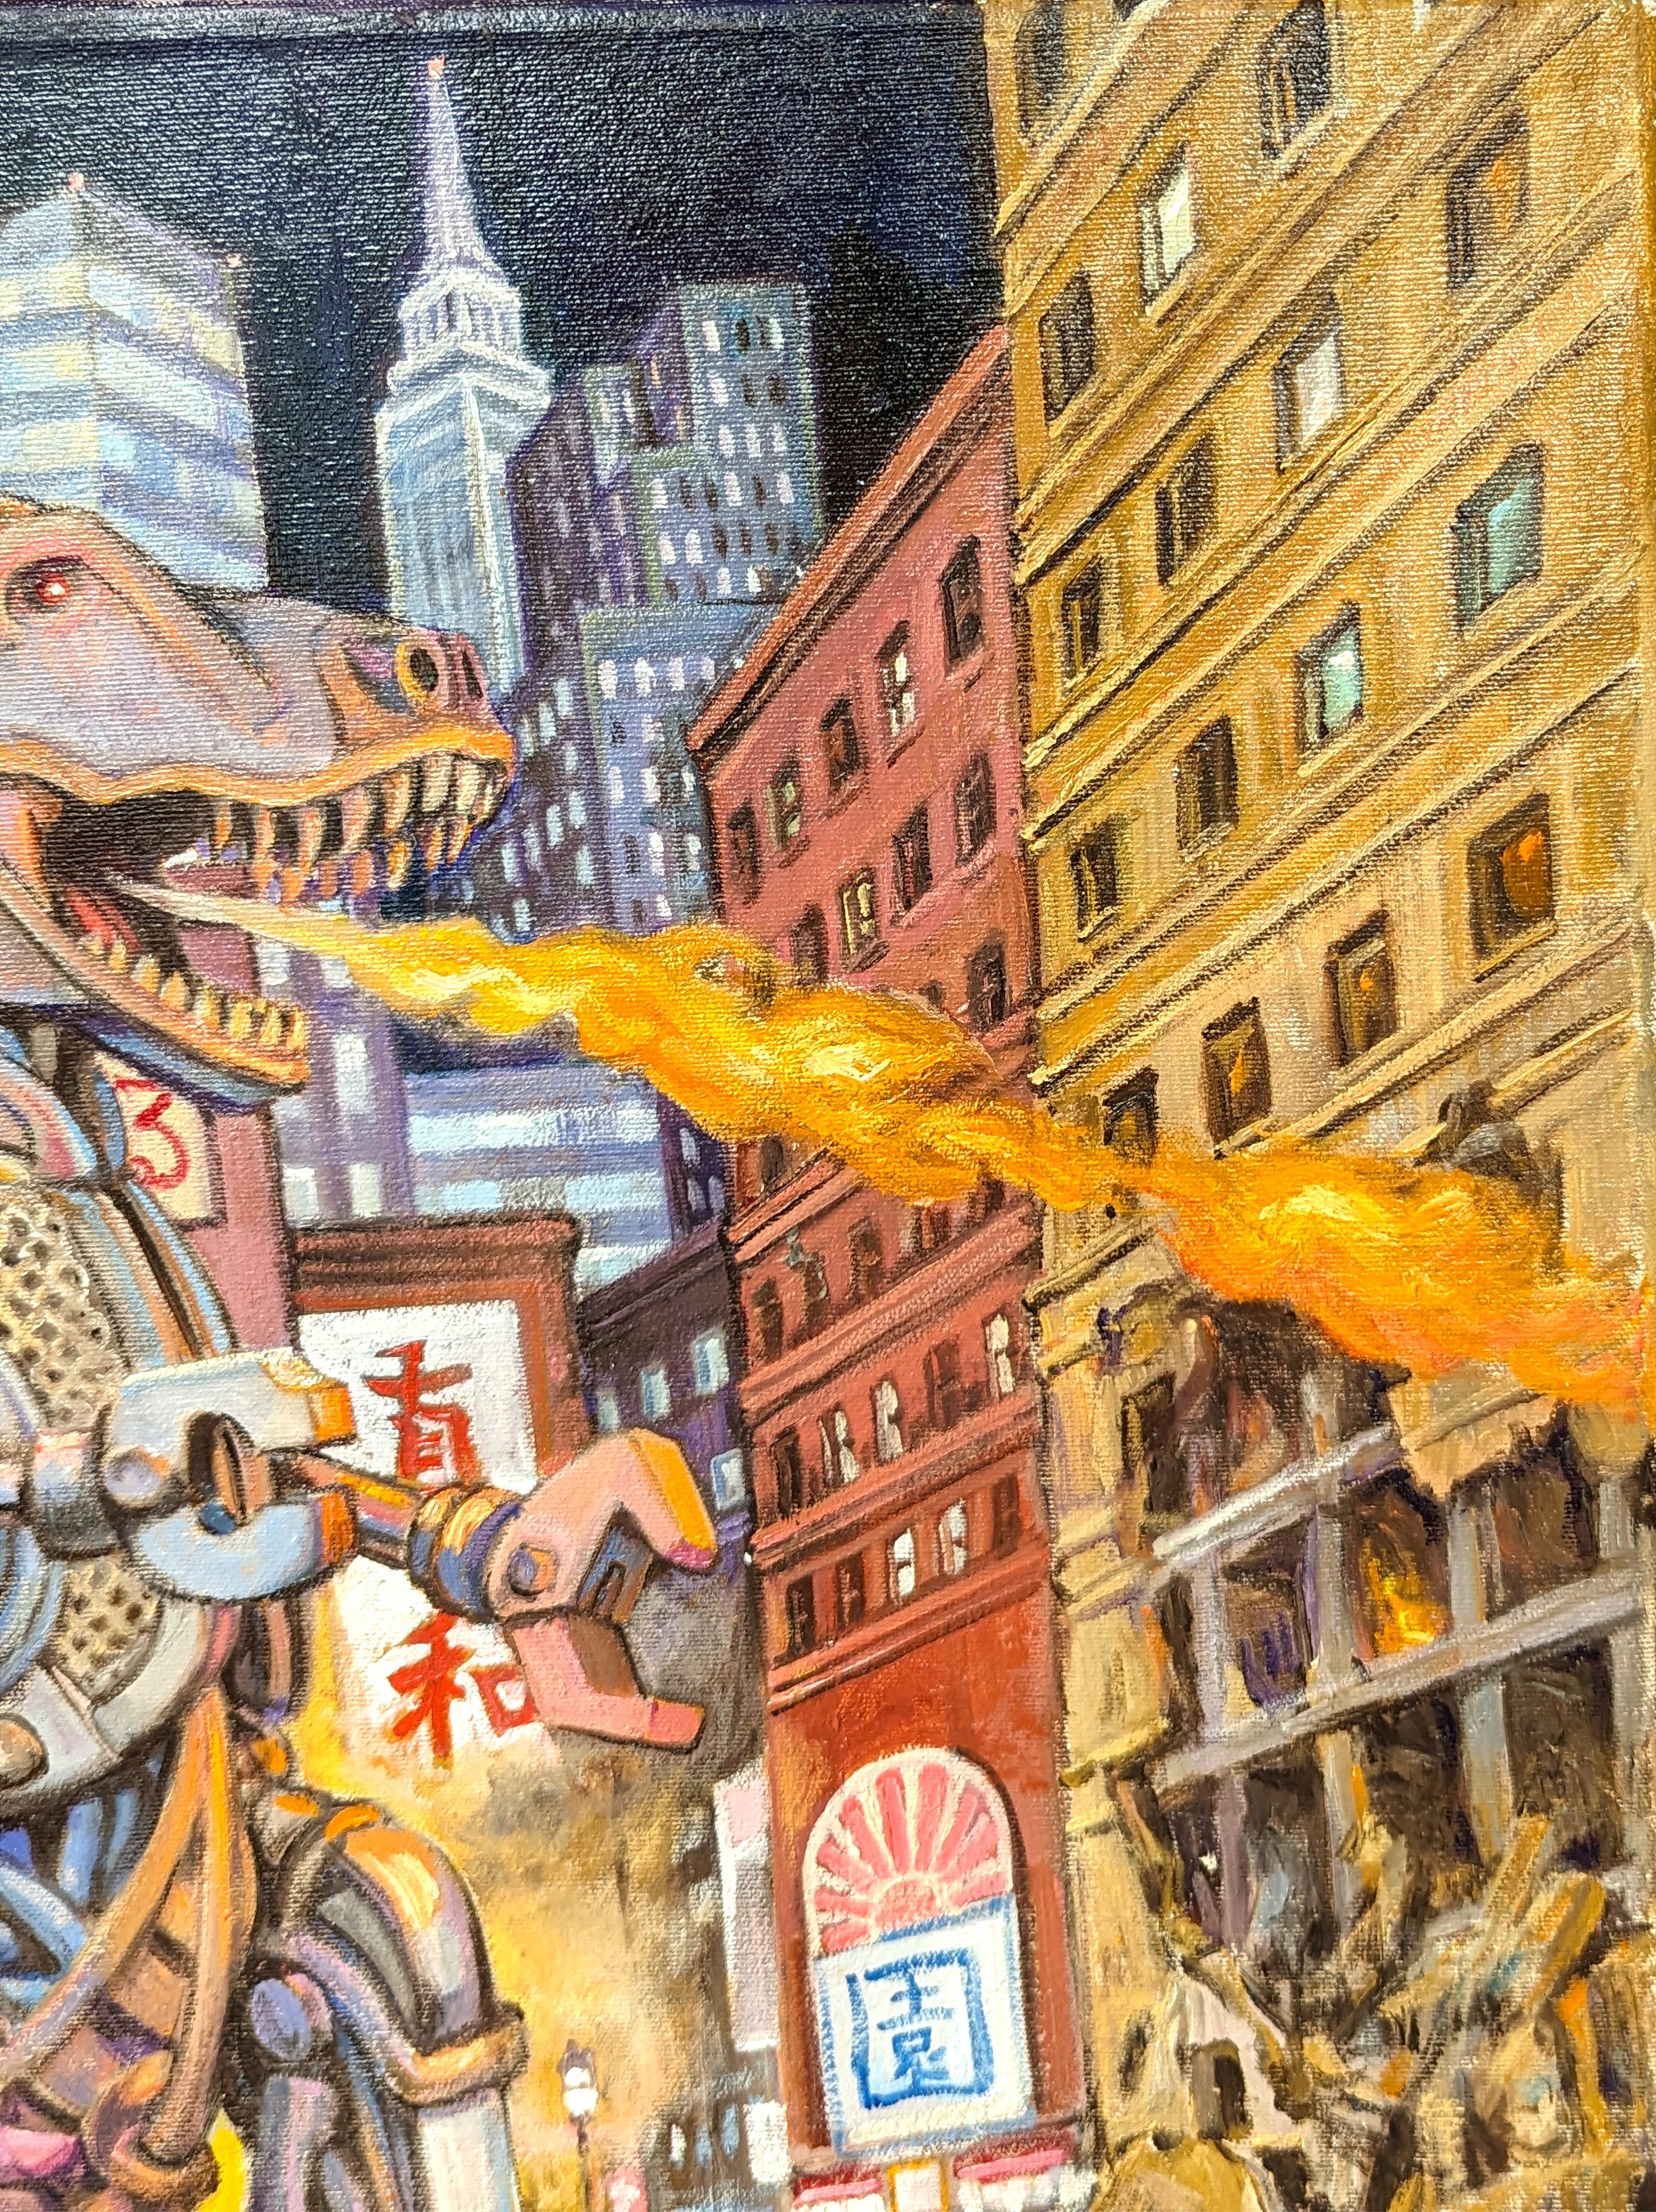 Colorful painting by contemporary artist Henry David Potwin. The work features a metal, fire breathing Godzilla-like creature rampaging through an urban downtown landscape. Signed in the front lower right corner. Titled and dated on reverse.